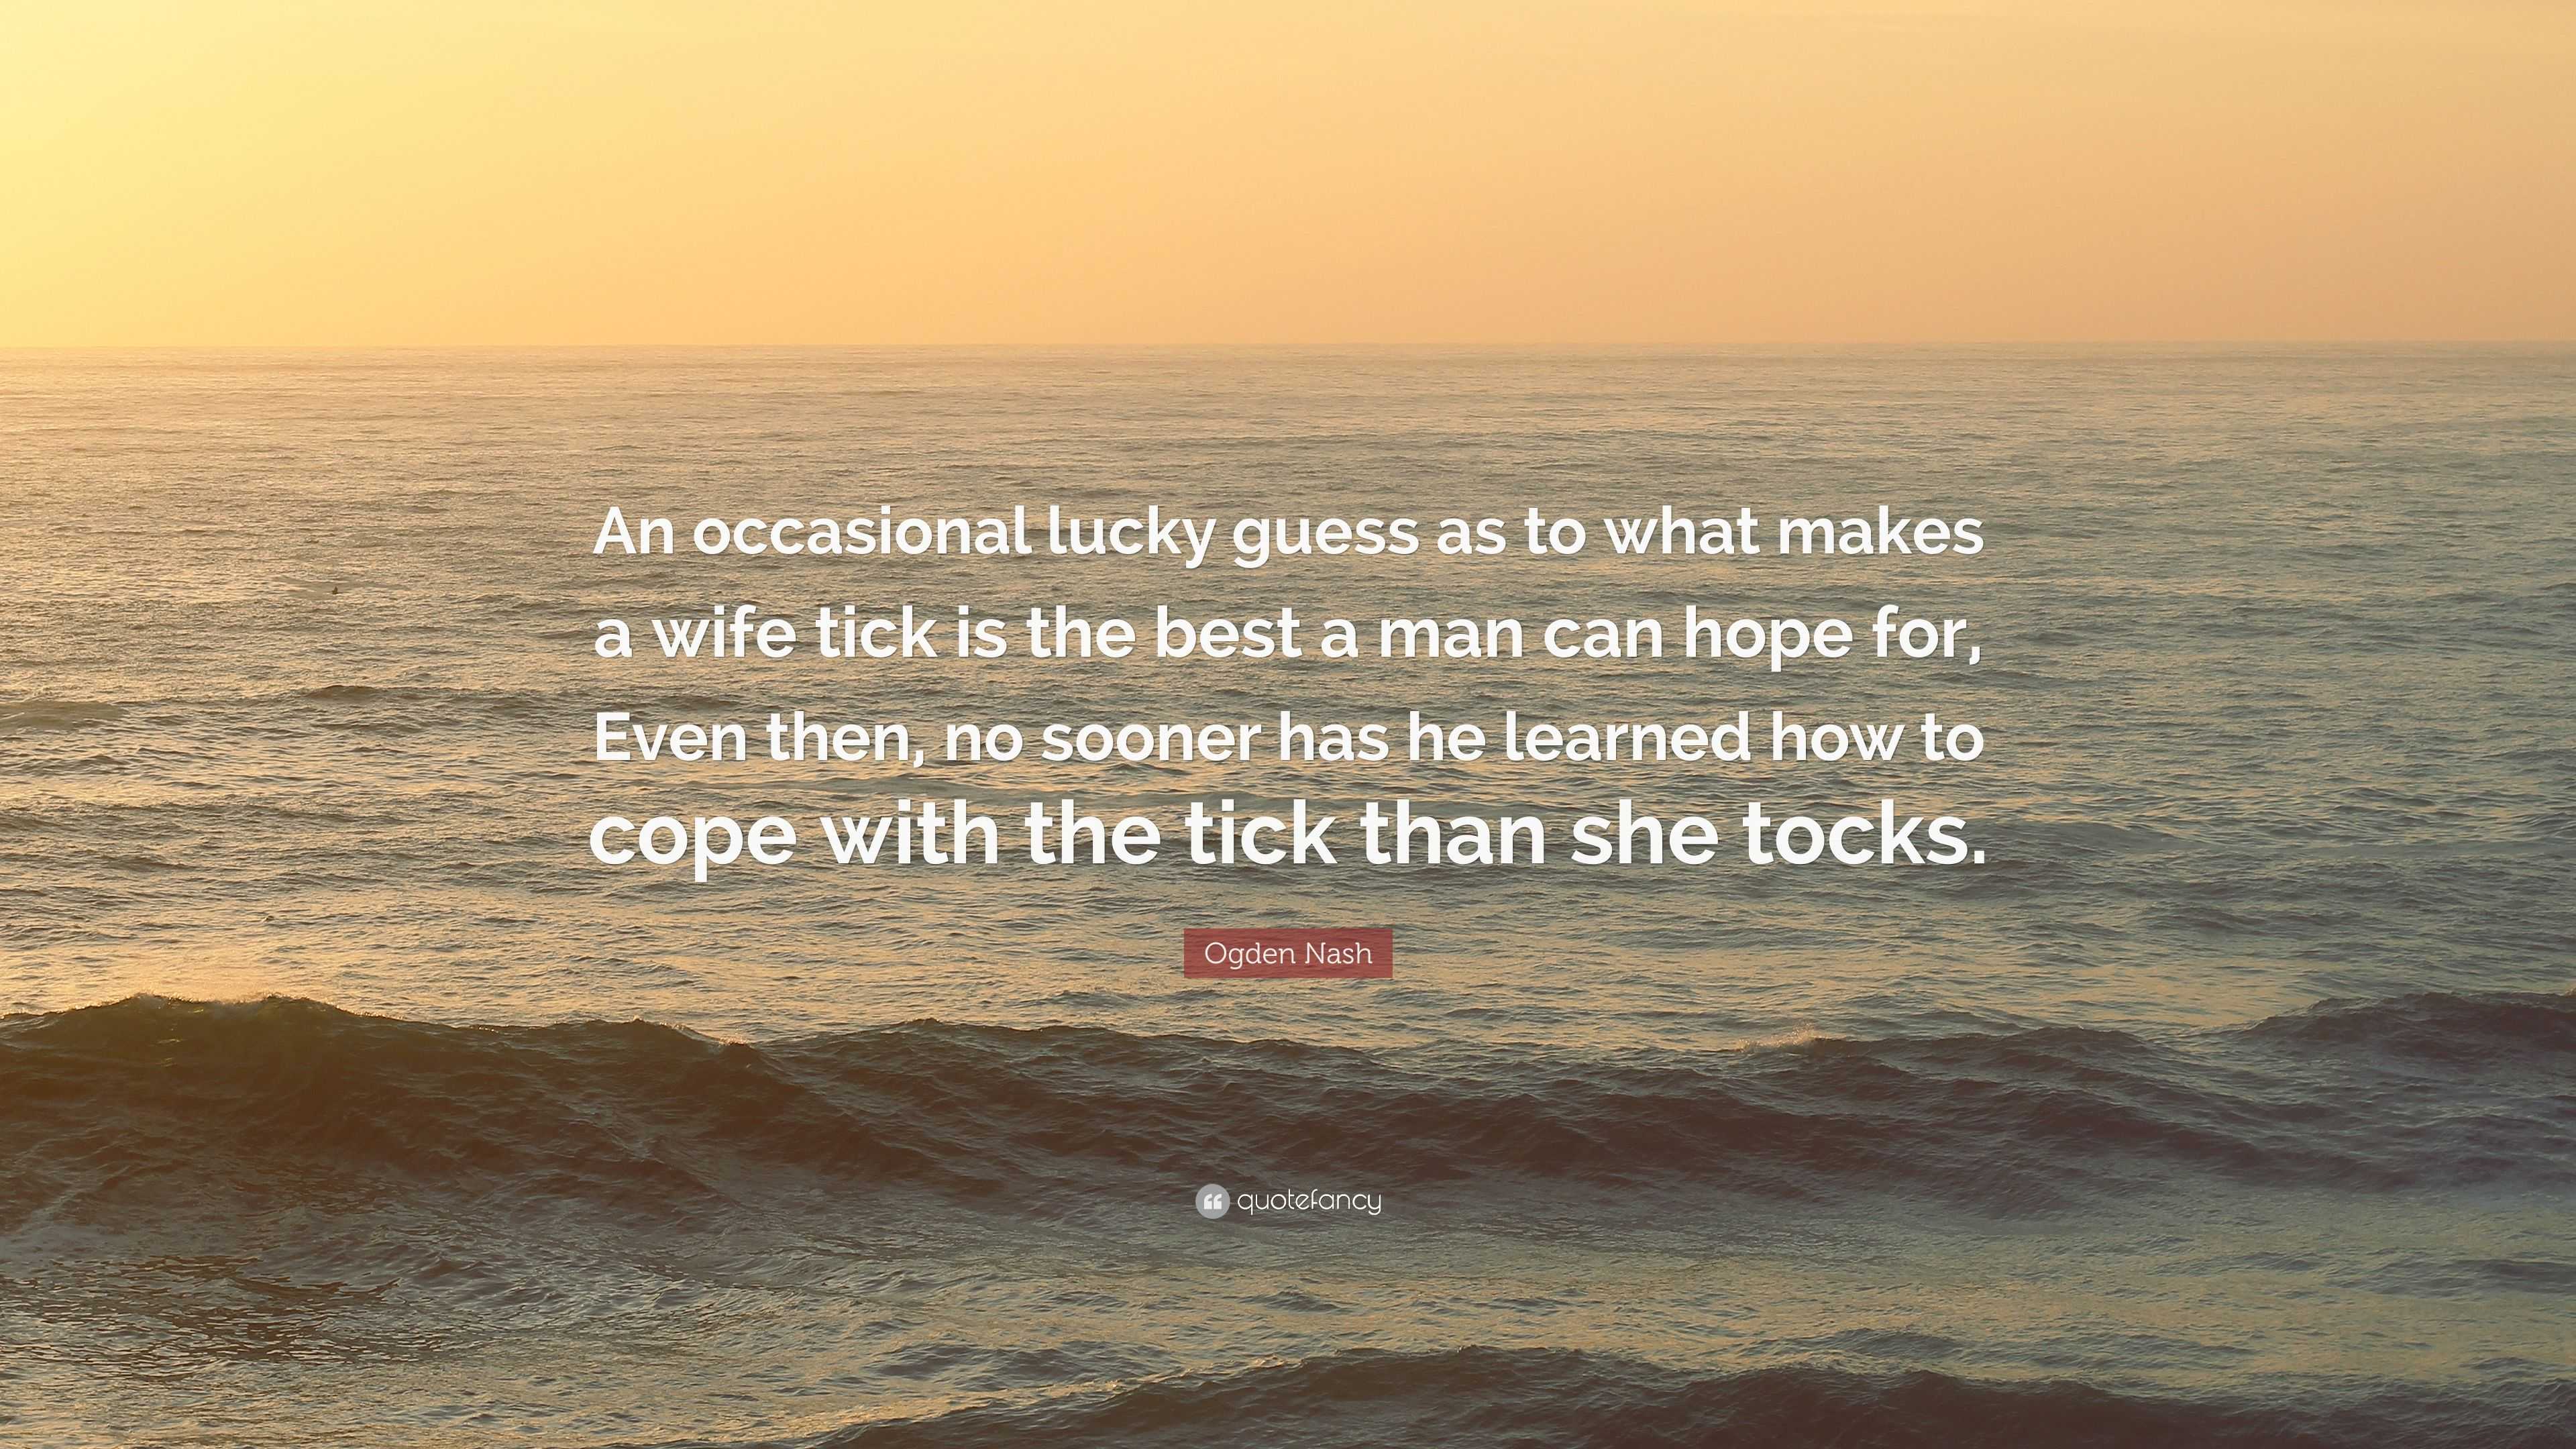 Ogden Nash Quote: “An occasional lucky guess as to what makes a wife ...